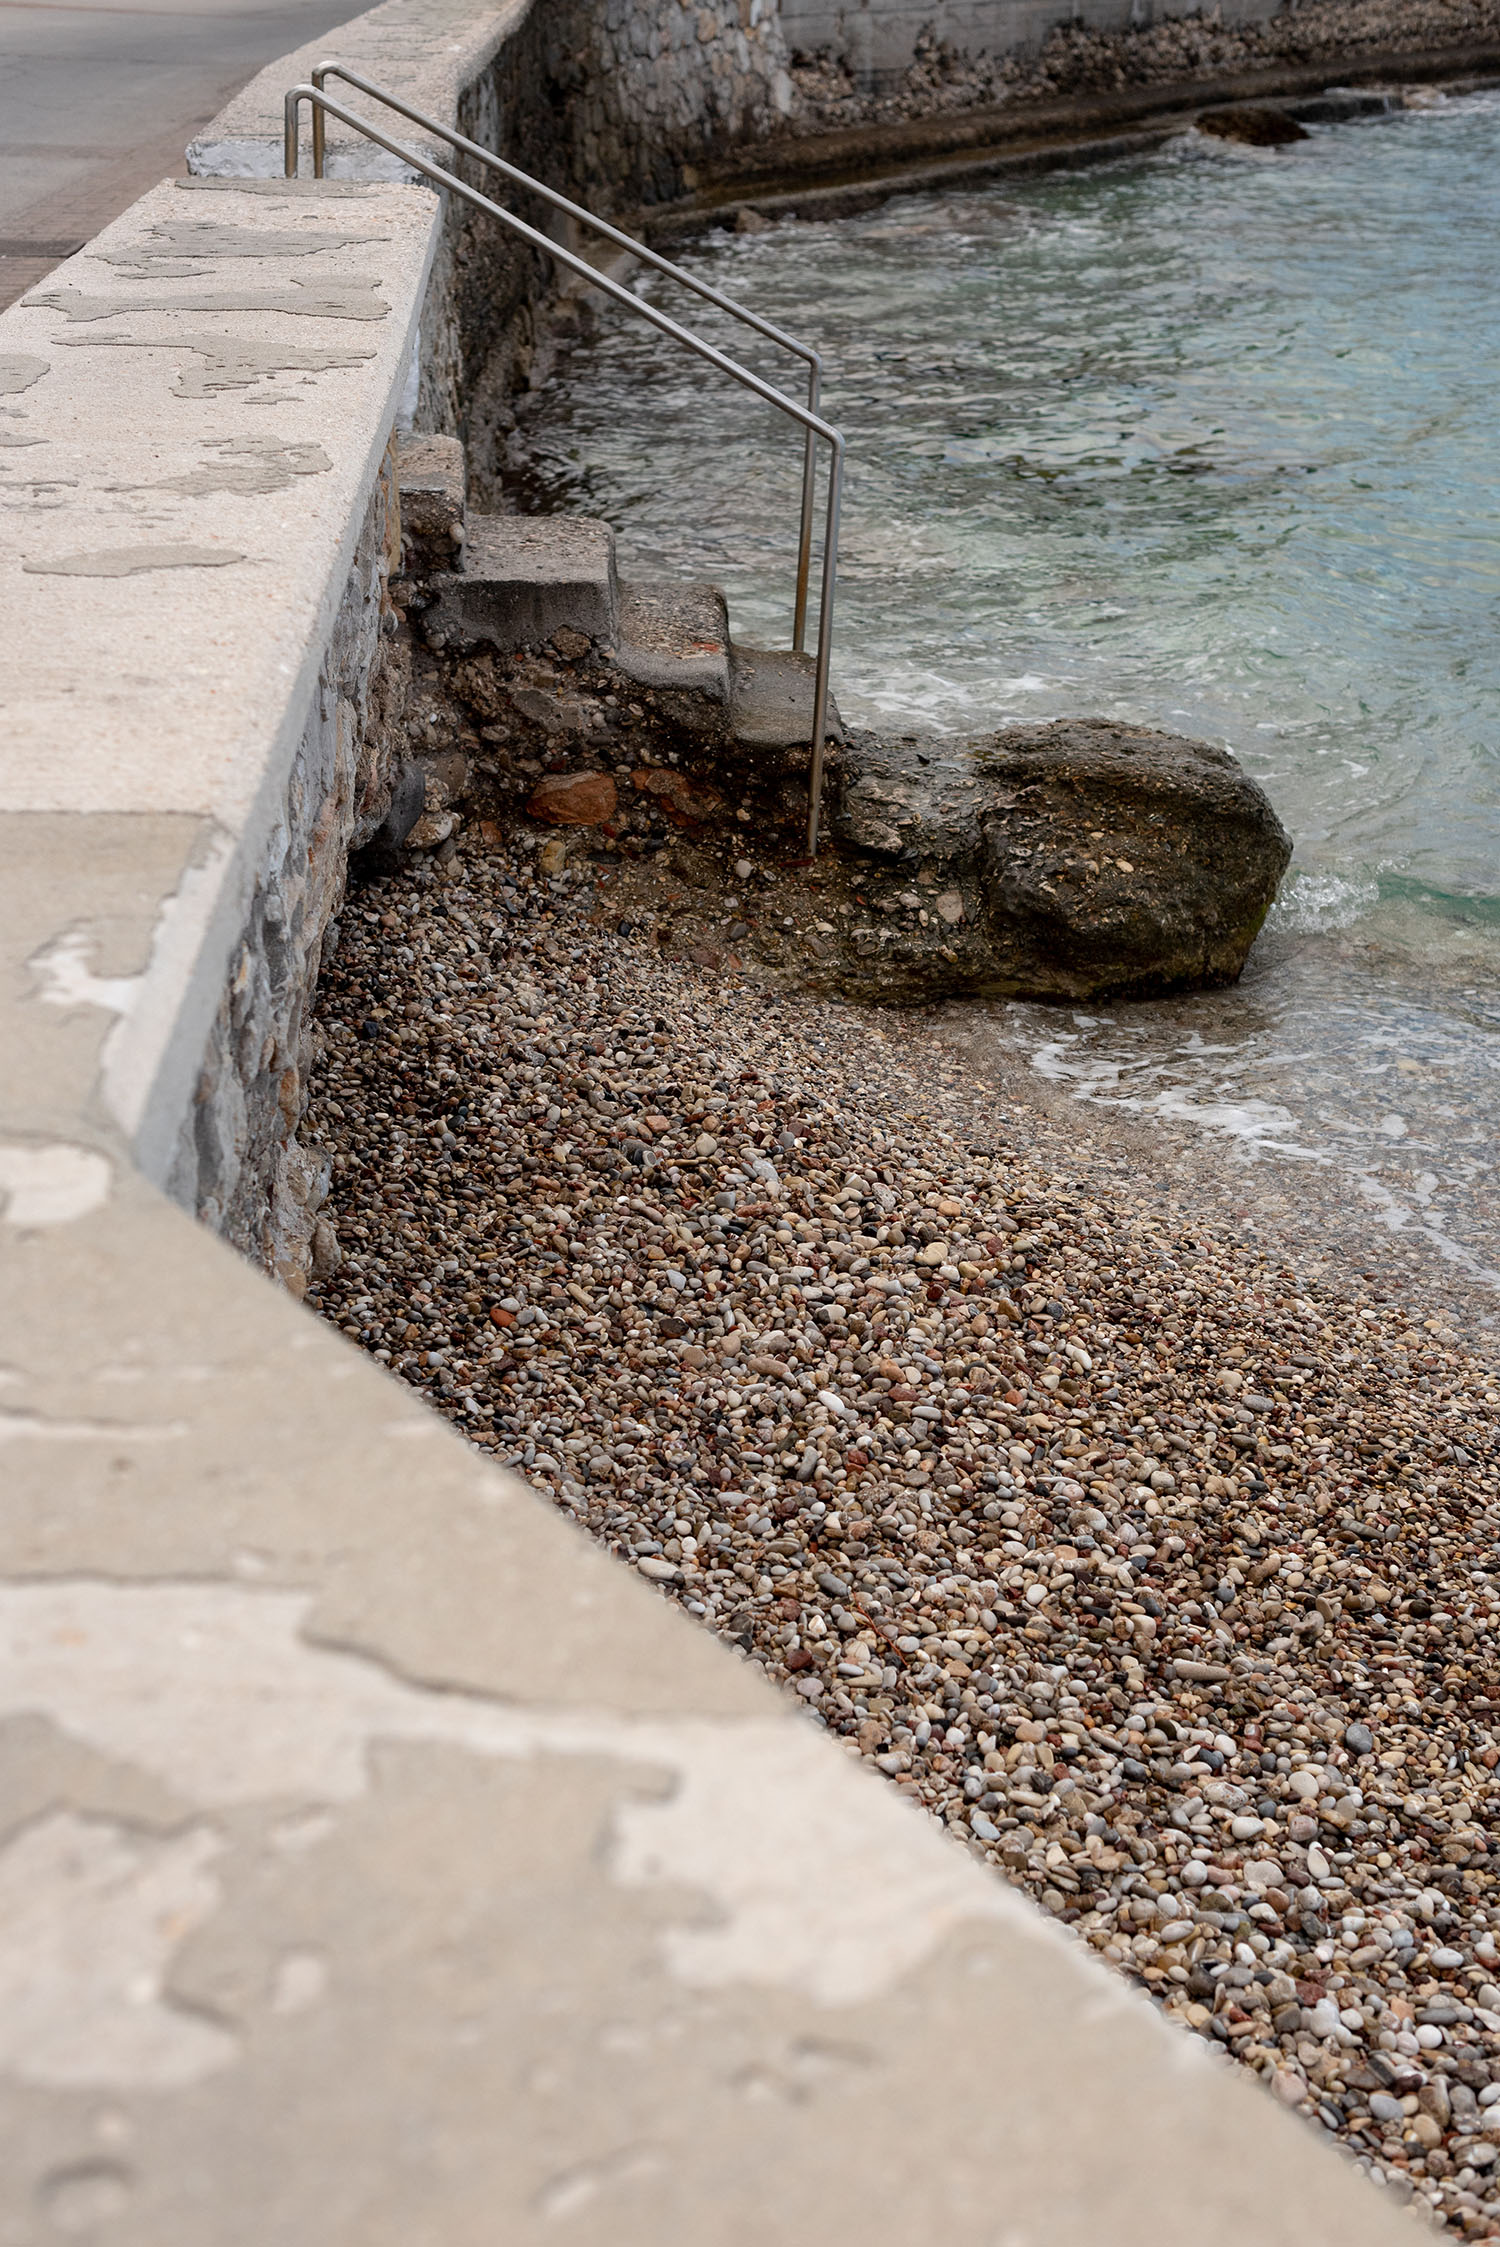 Coco & Vera - Stone stairs into the sea at a rocky beach on Spetses Island